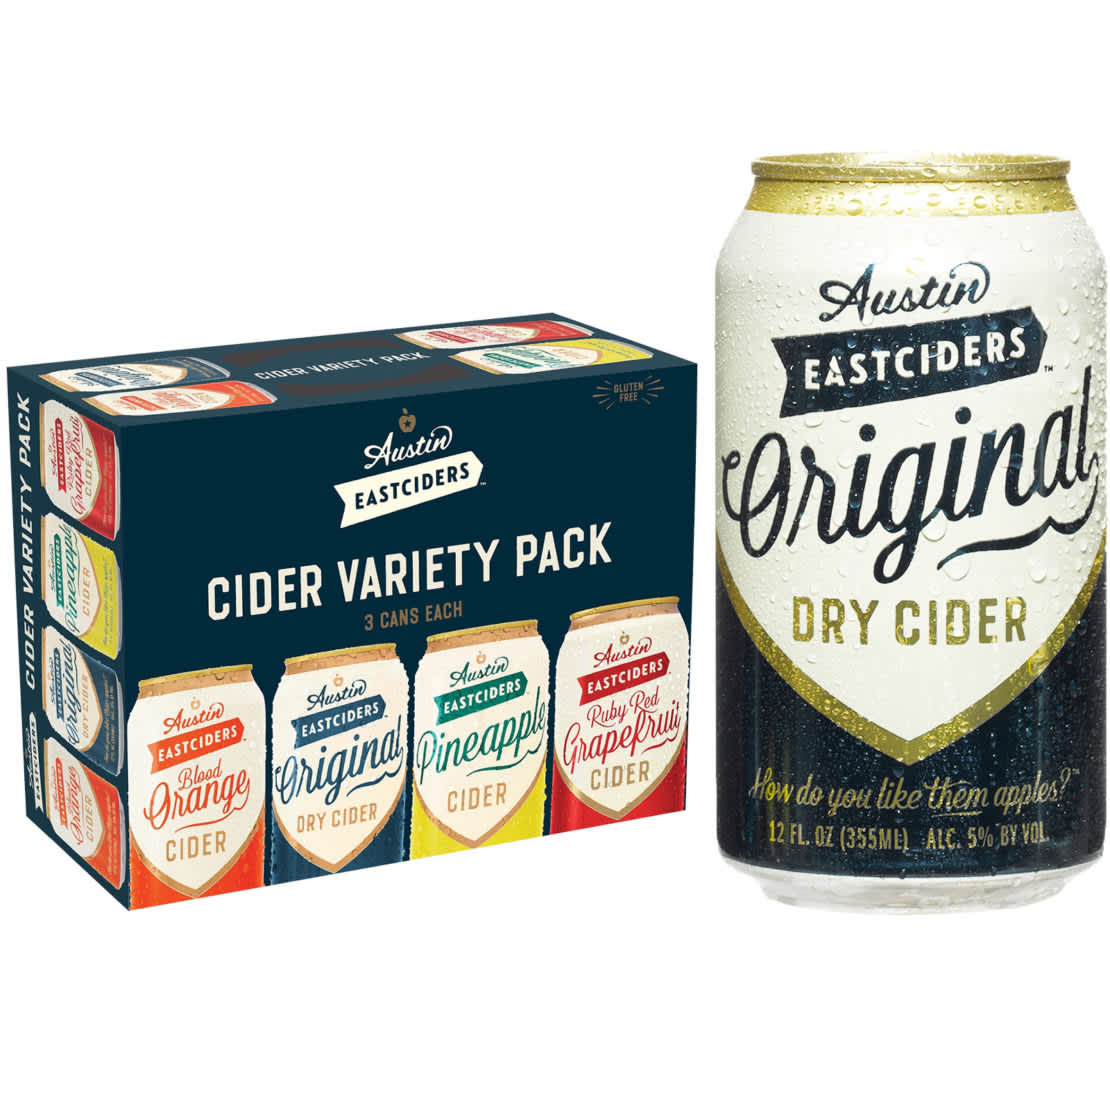 A variety pack of assorted Austin Eastciders hard ciders, 12-pack